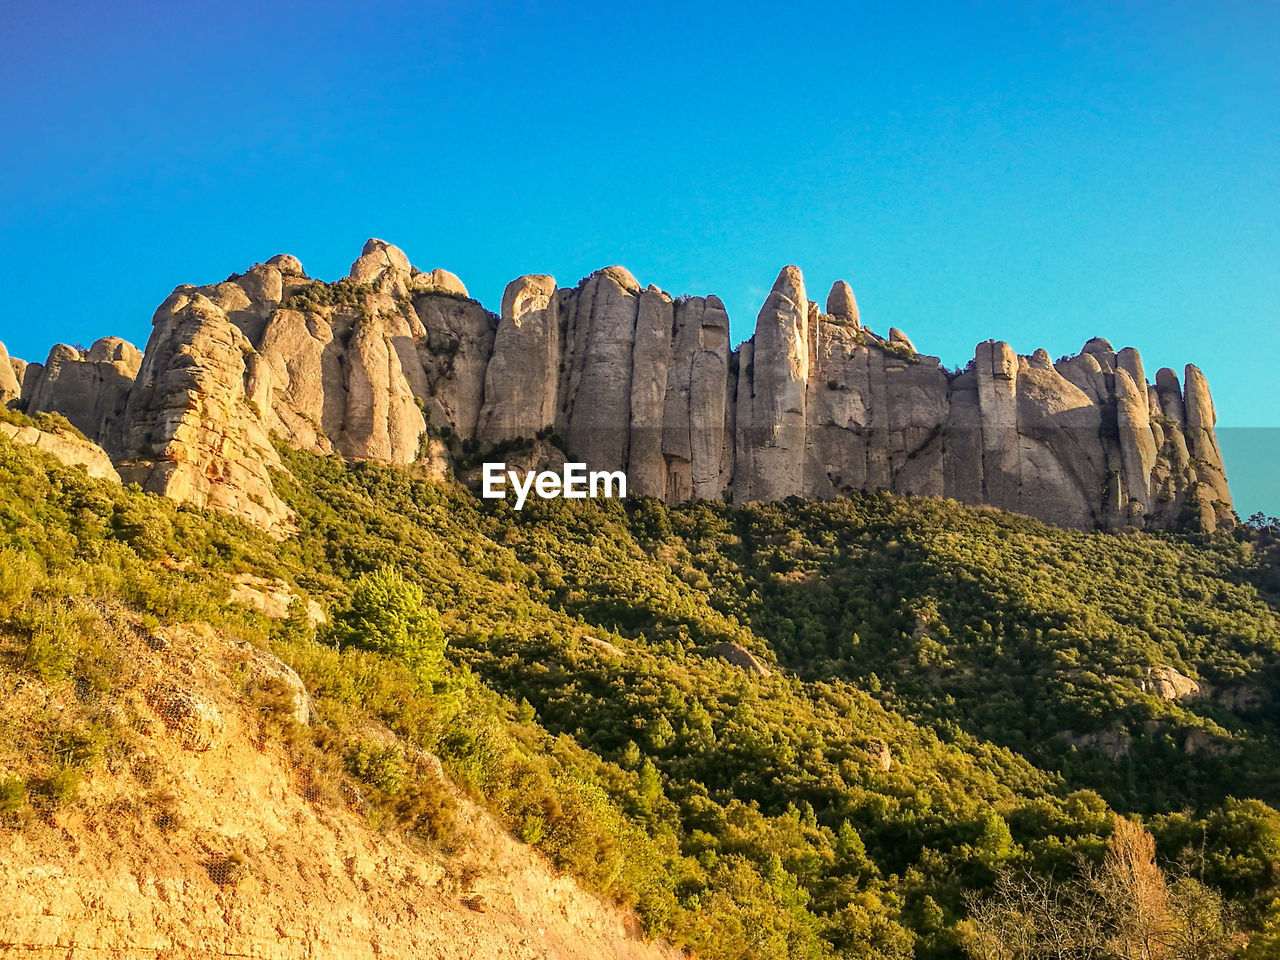 Panoramic view of rocks and trees against blue sky